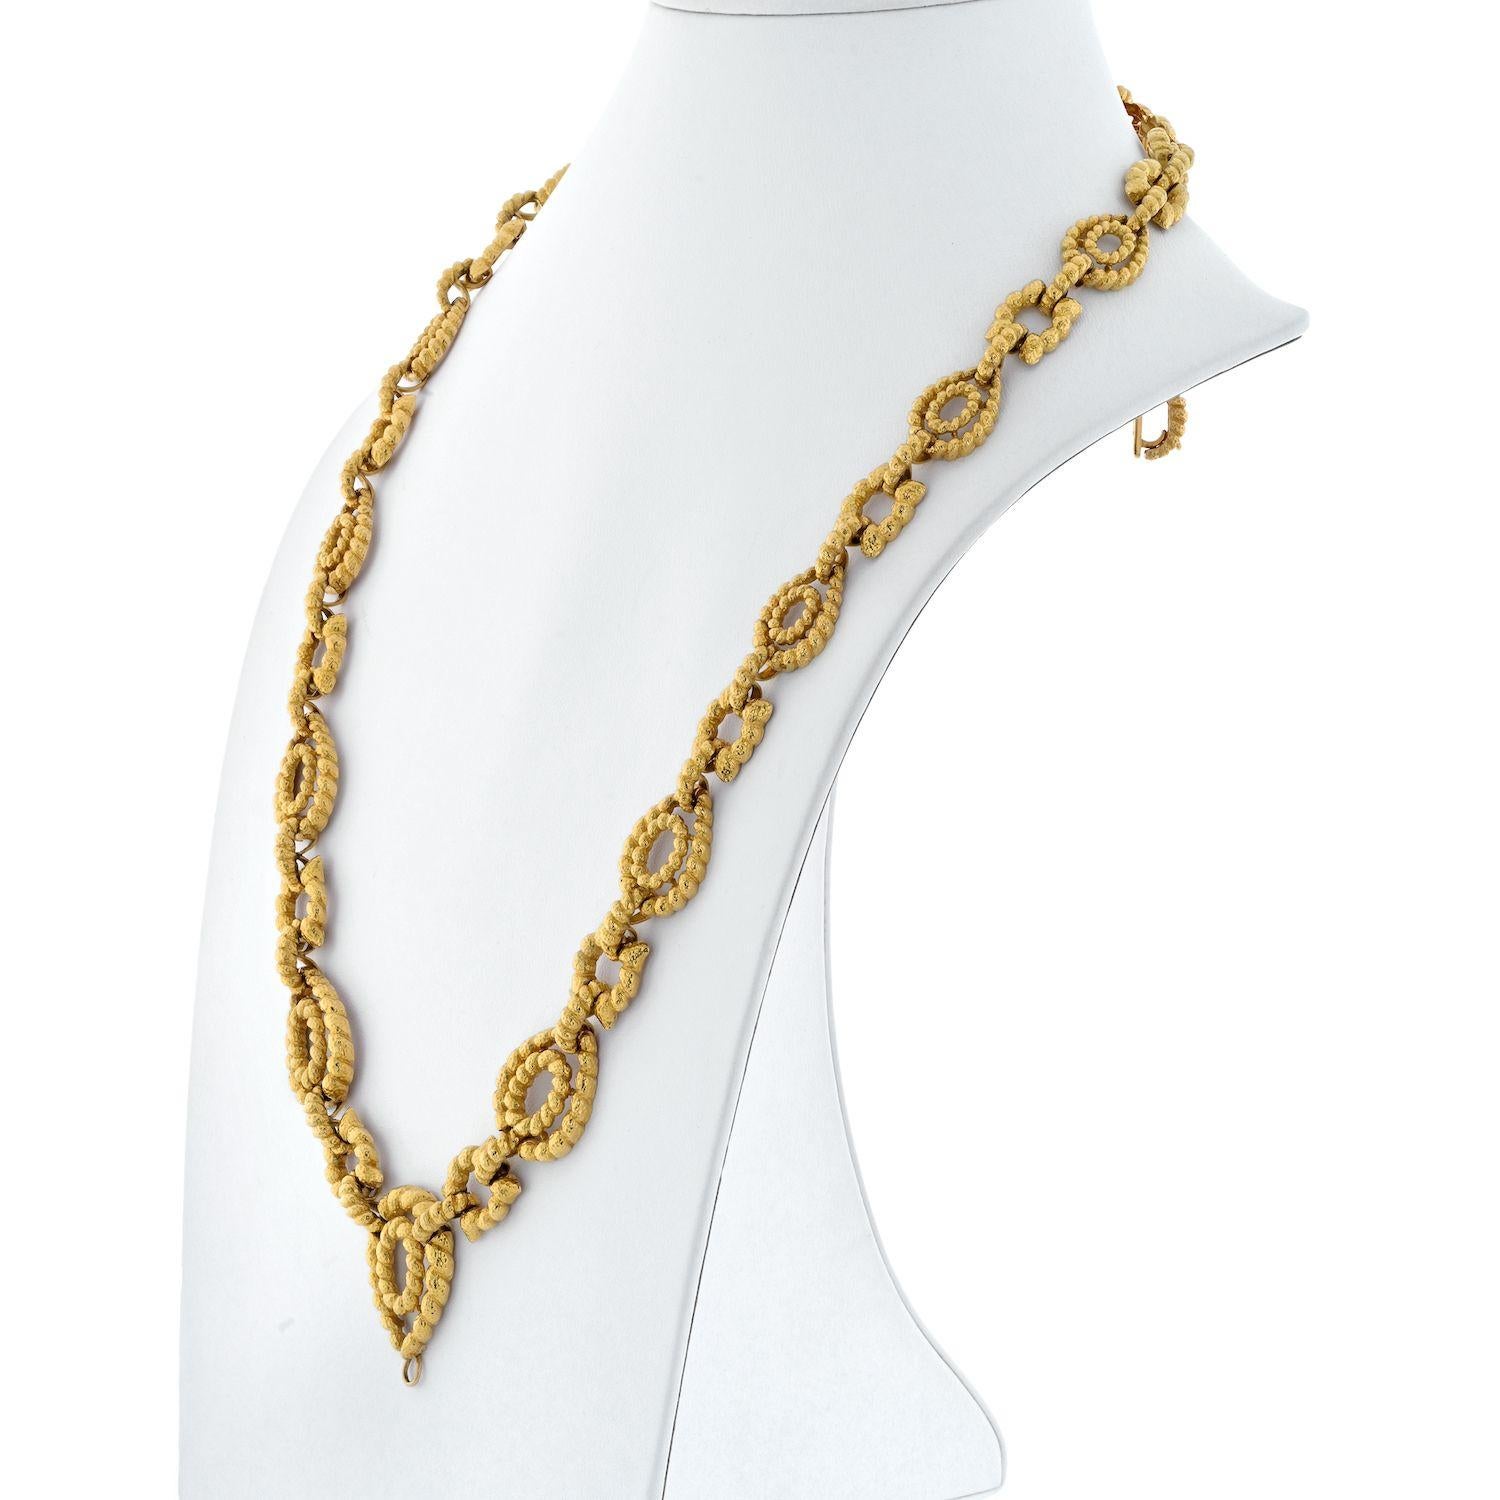 David Webb 18K Yellow Gold Twisted Open Link Long Necklace.
This is a yellow gold chain designed by David Webb with stylized links, suitable for David Webb pendant.
Total Length: 31.5 inches.
Removable Extension: 8 inches (can be worn as a